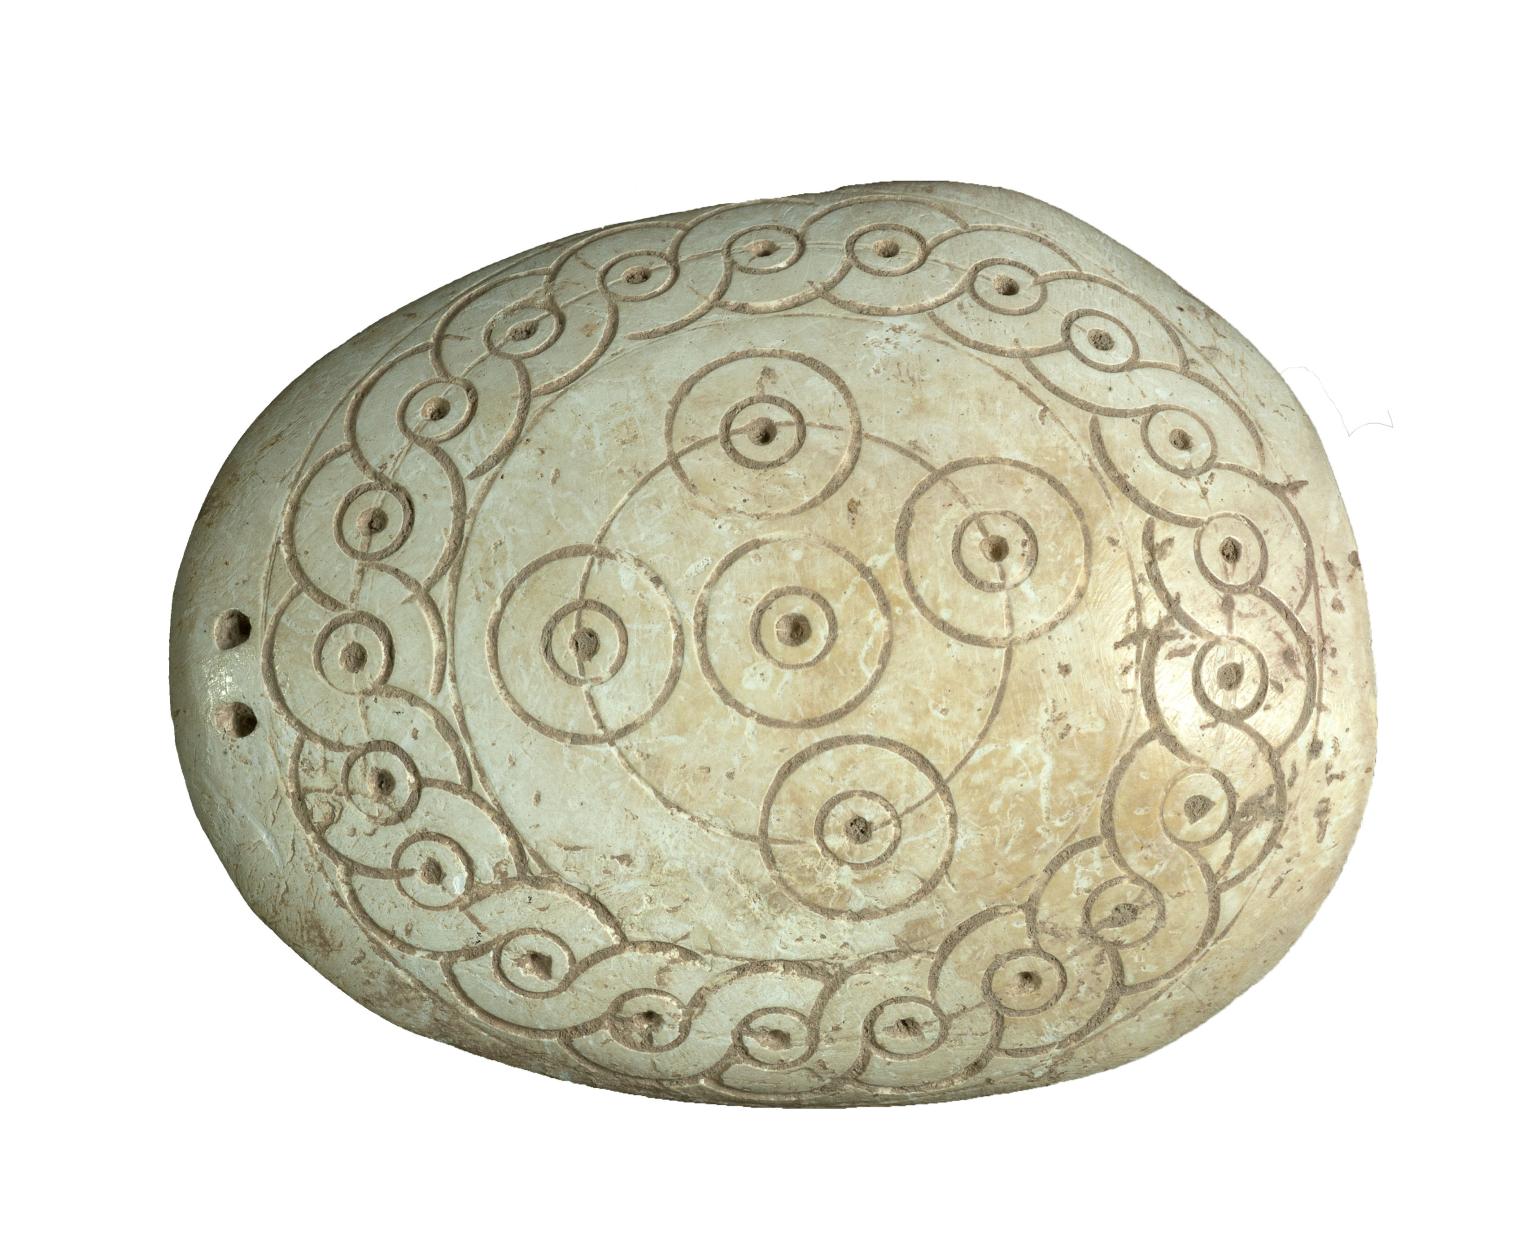 Oval-shaped seashell incised with concentric circles, spirals, and dots in center of circles. 